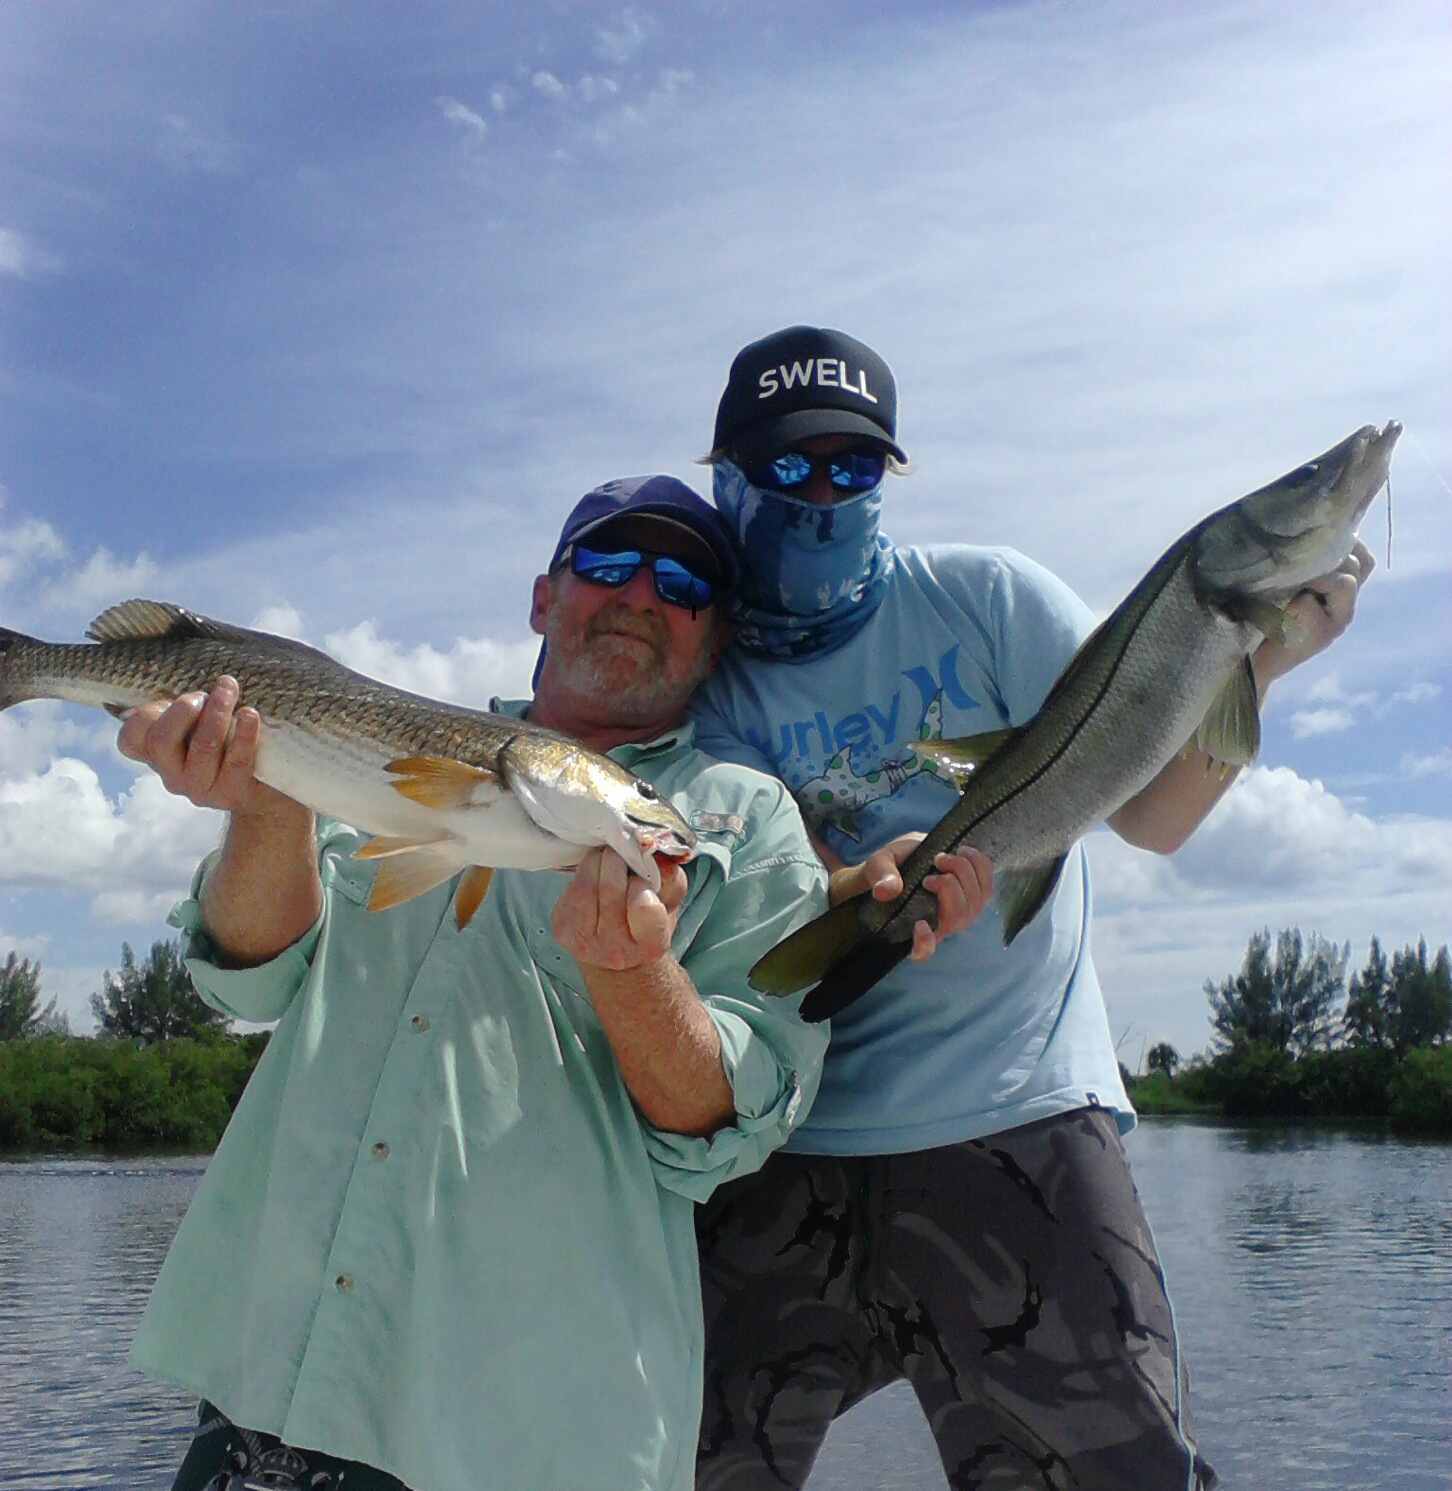 Captain Terry says “Great fishing for Snook, Redfish and other 